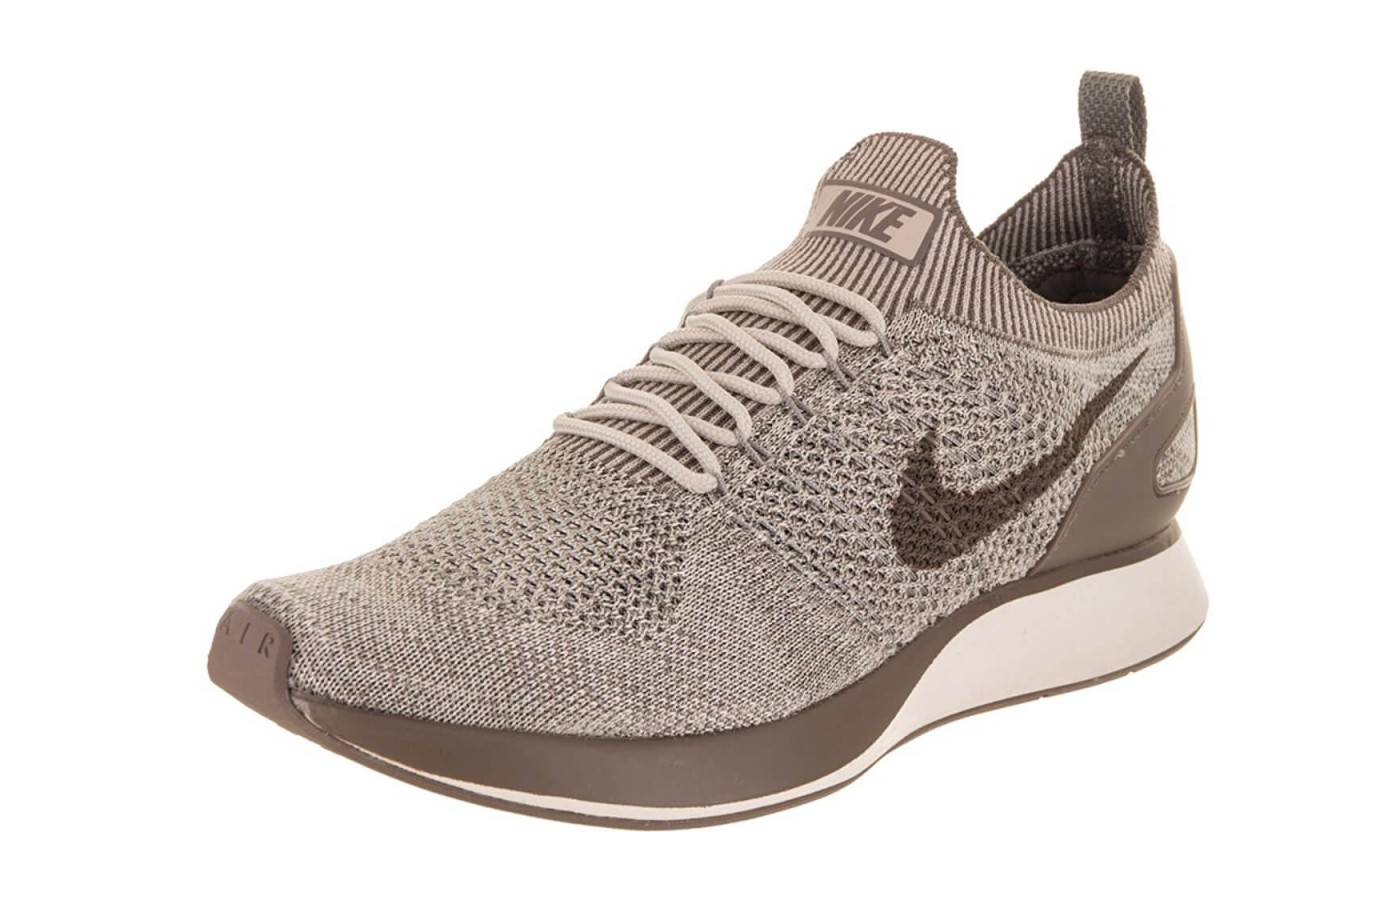 The Nike Air Zoom Mariah Flyknit Racer features a breathable Flyknit upper